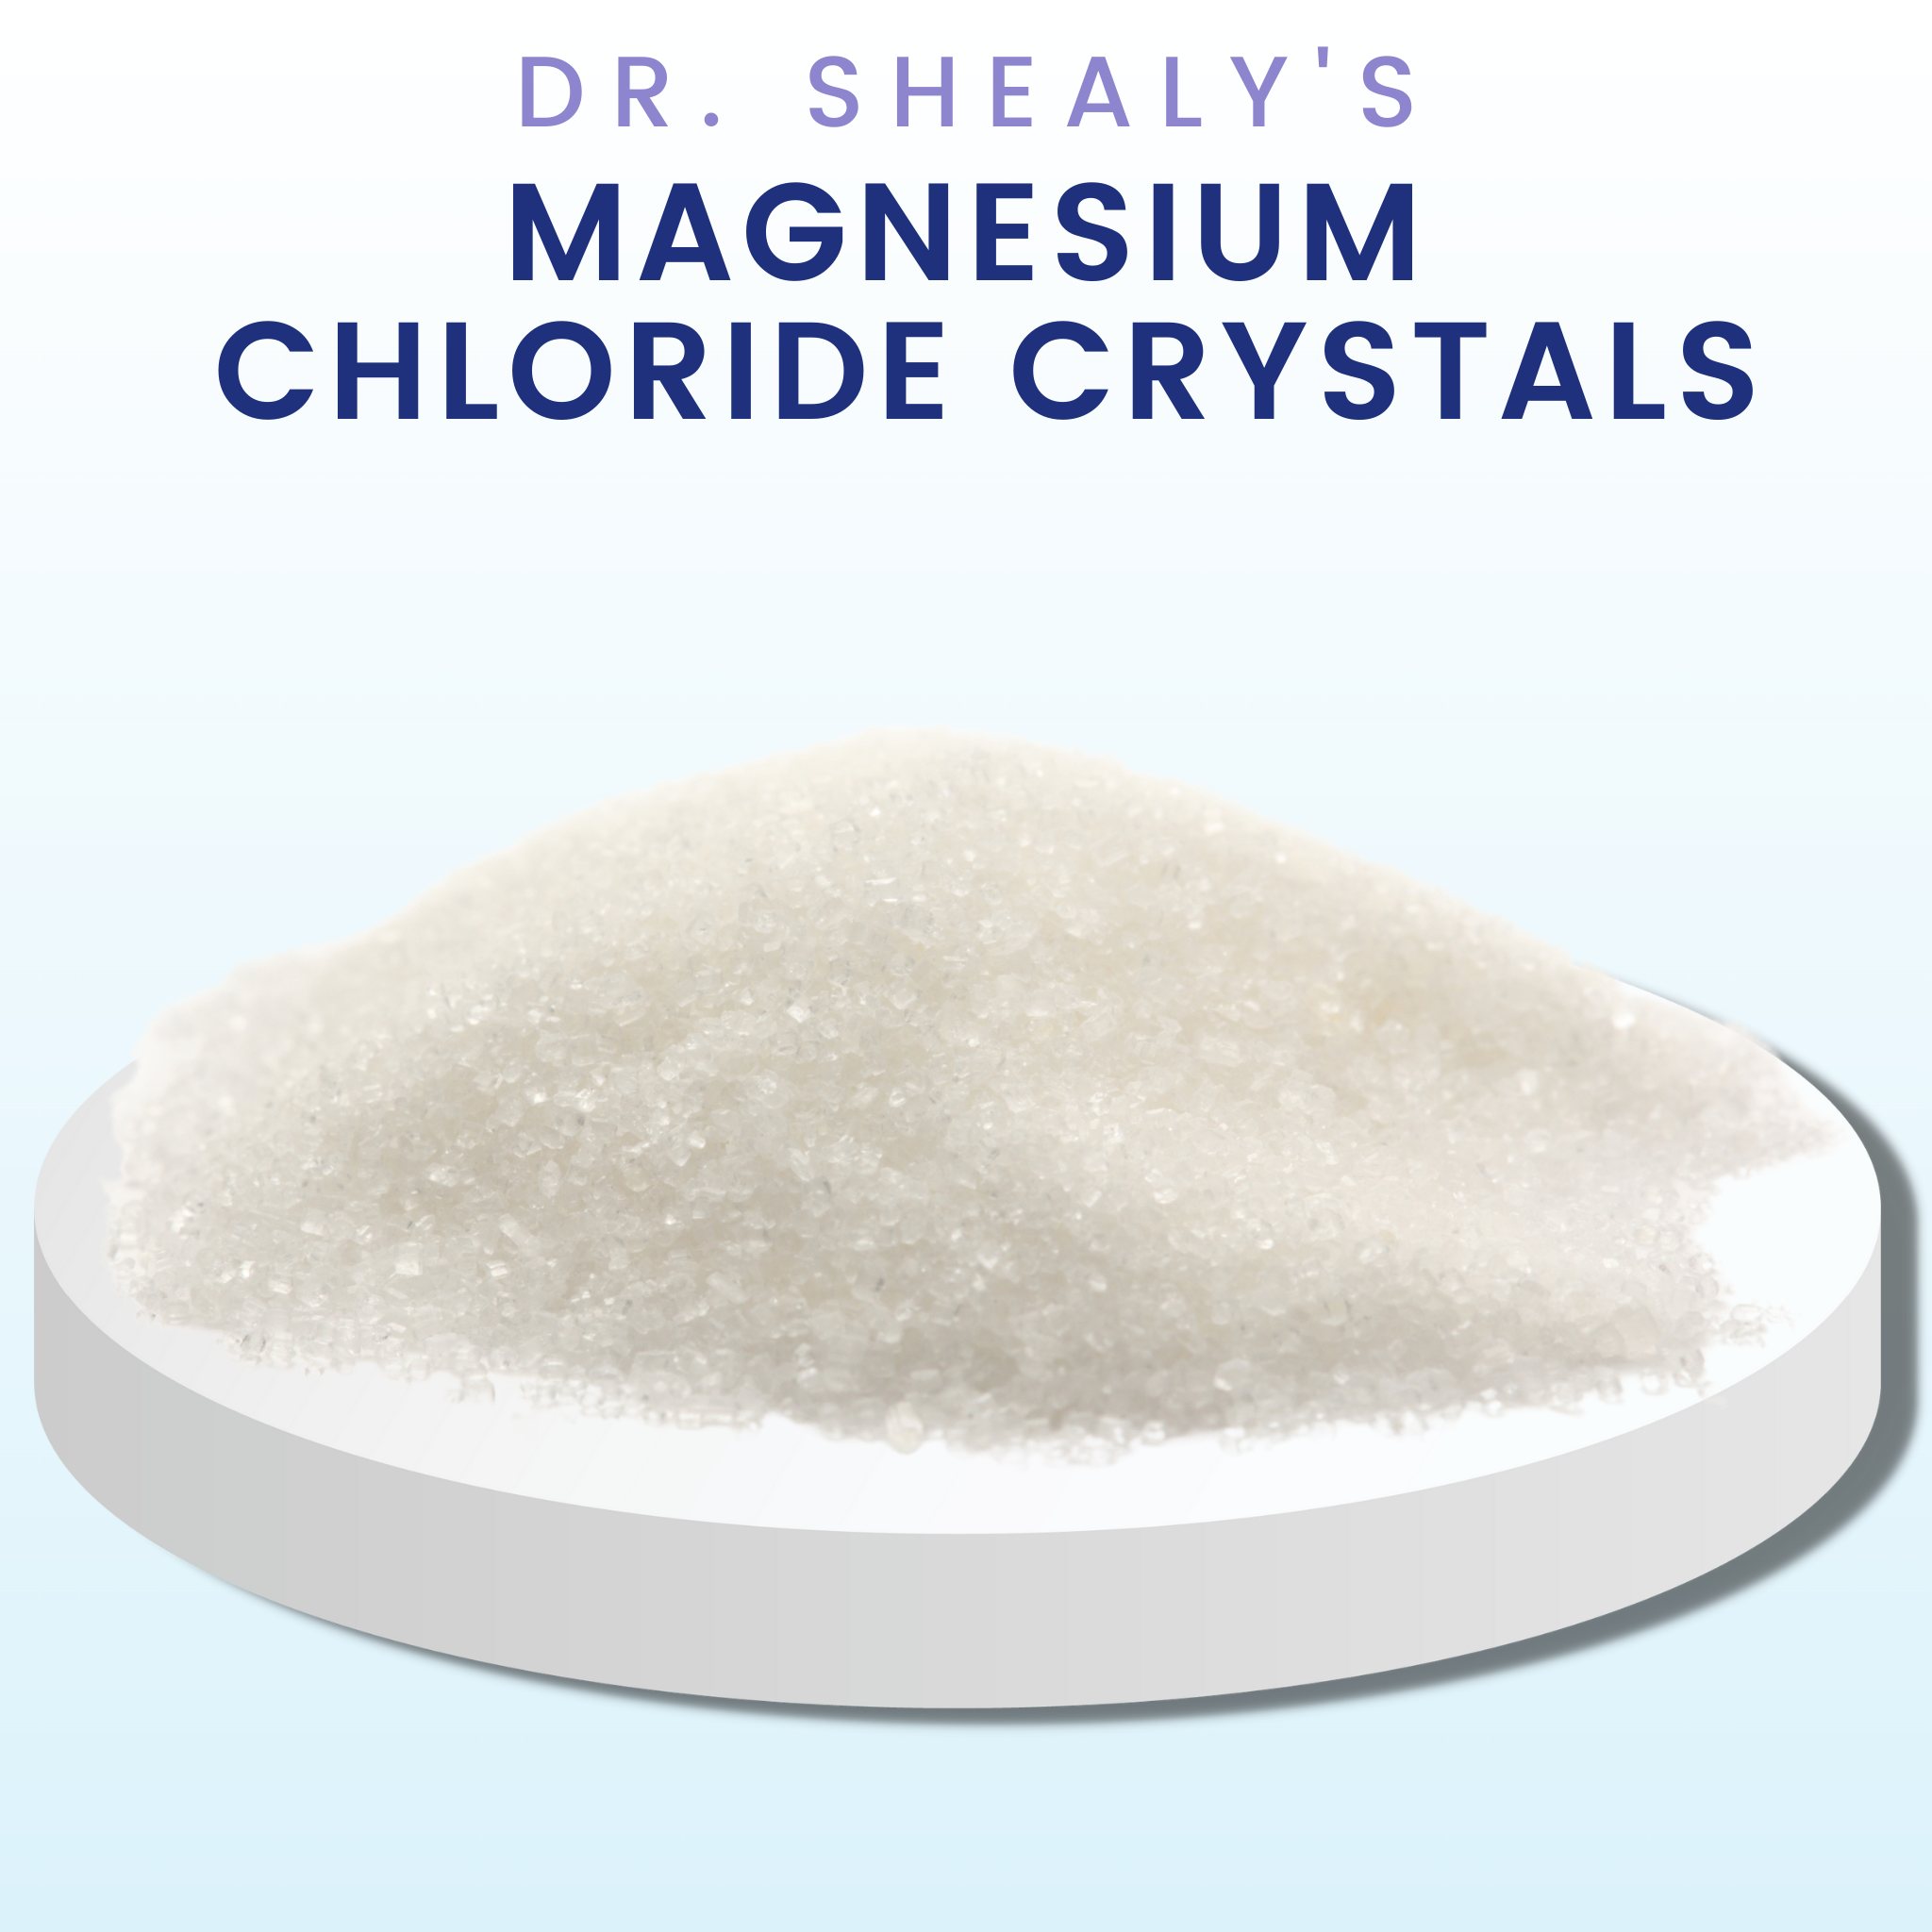 Dr. Shealy's Magnesium Chloride Crystals (3lb)